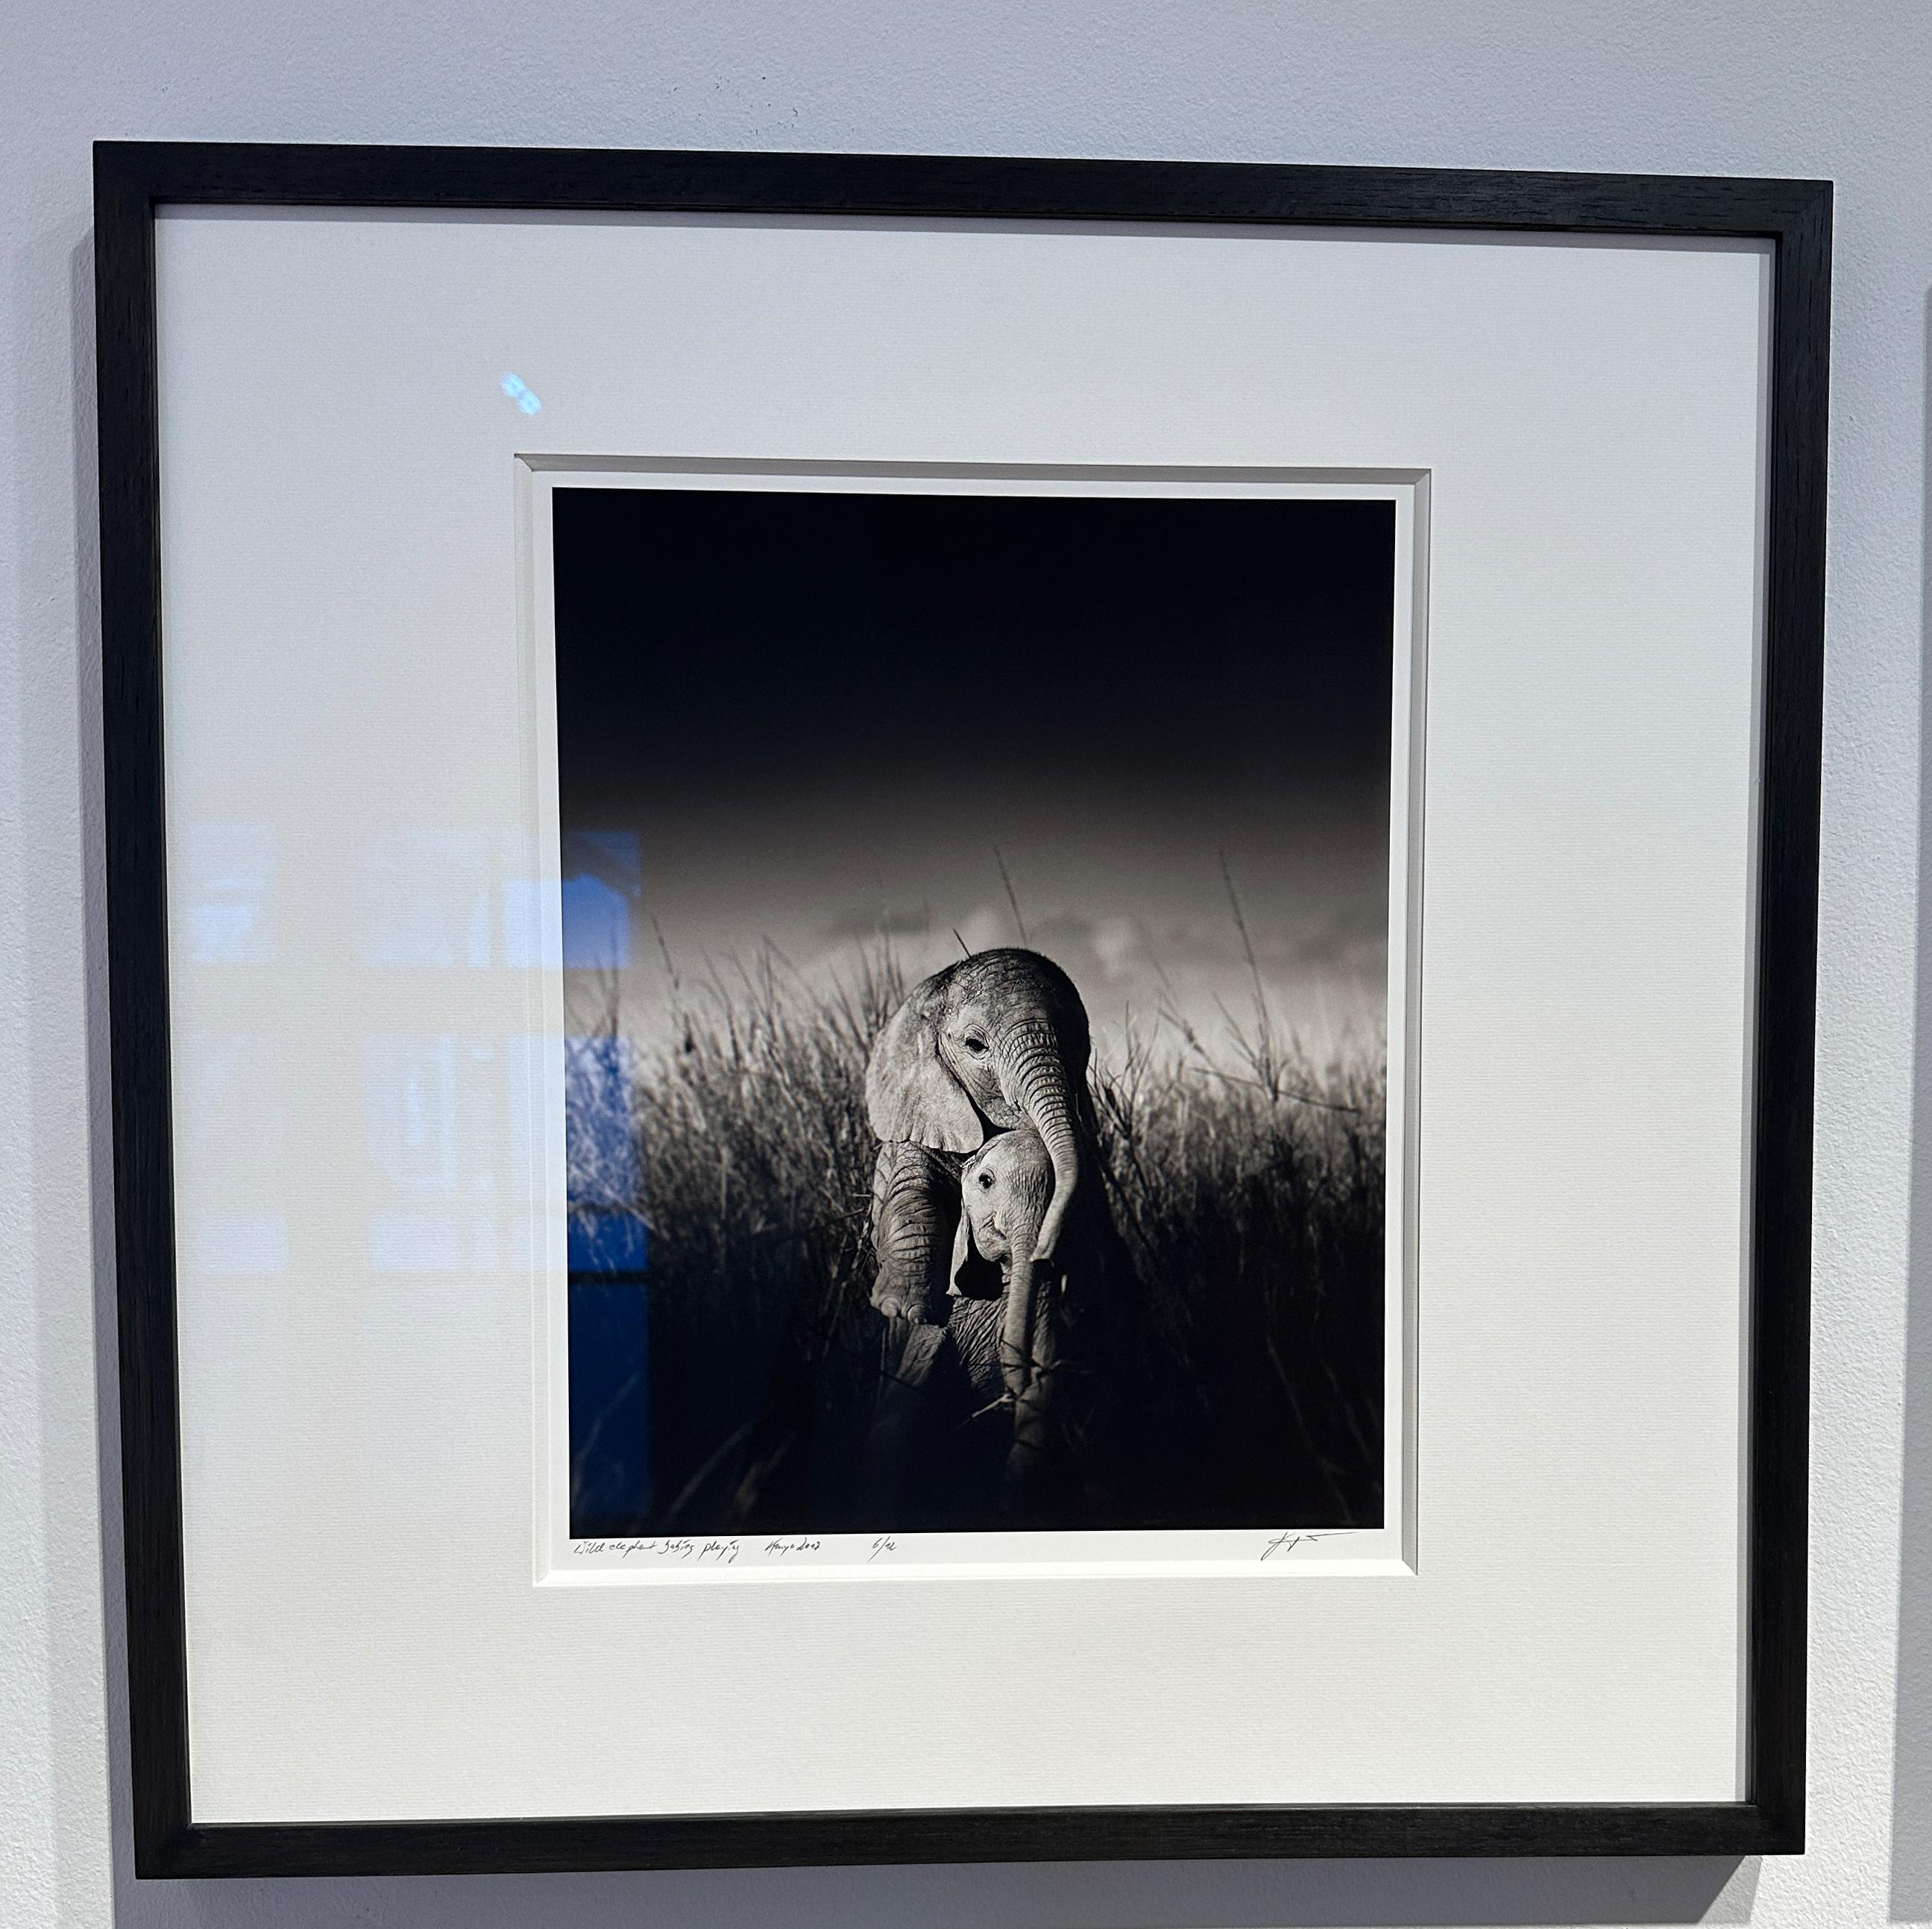 Edition No. 6/12
Image size 28,5 x 35,6 cm
signed and numbered
Framed with mat and anti-reflex glass.

A black and white image of wild elephant babies playing together in the tall grass in Amboseli National Park in Kenya.

Joachim Schmeisser is